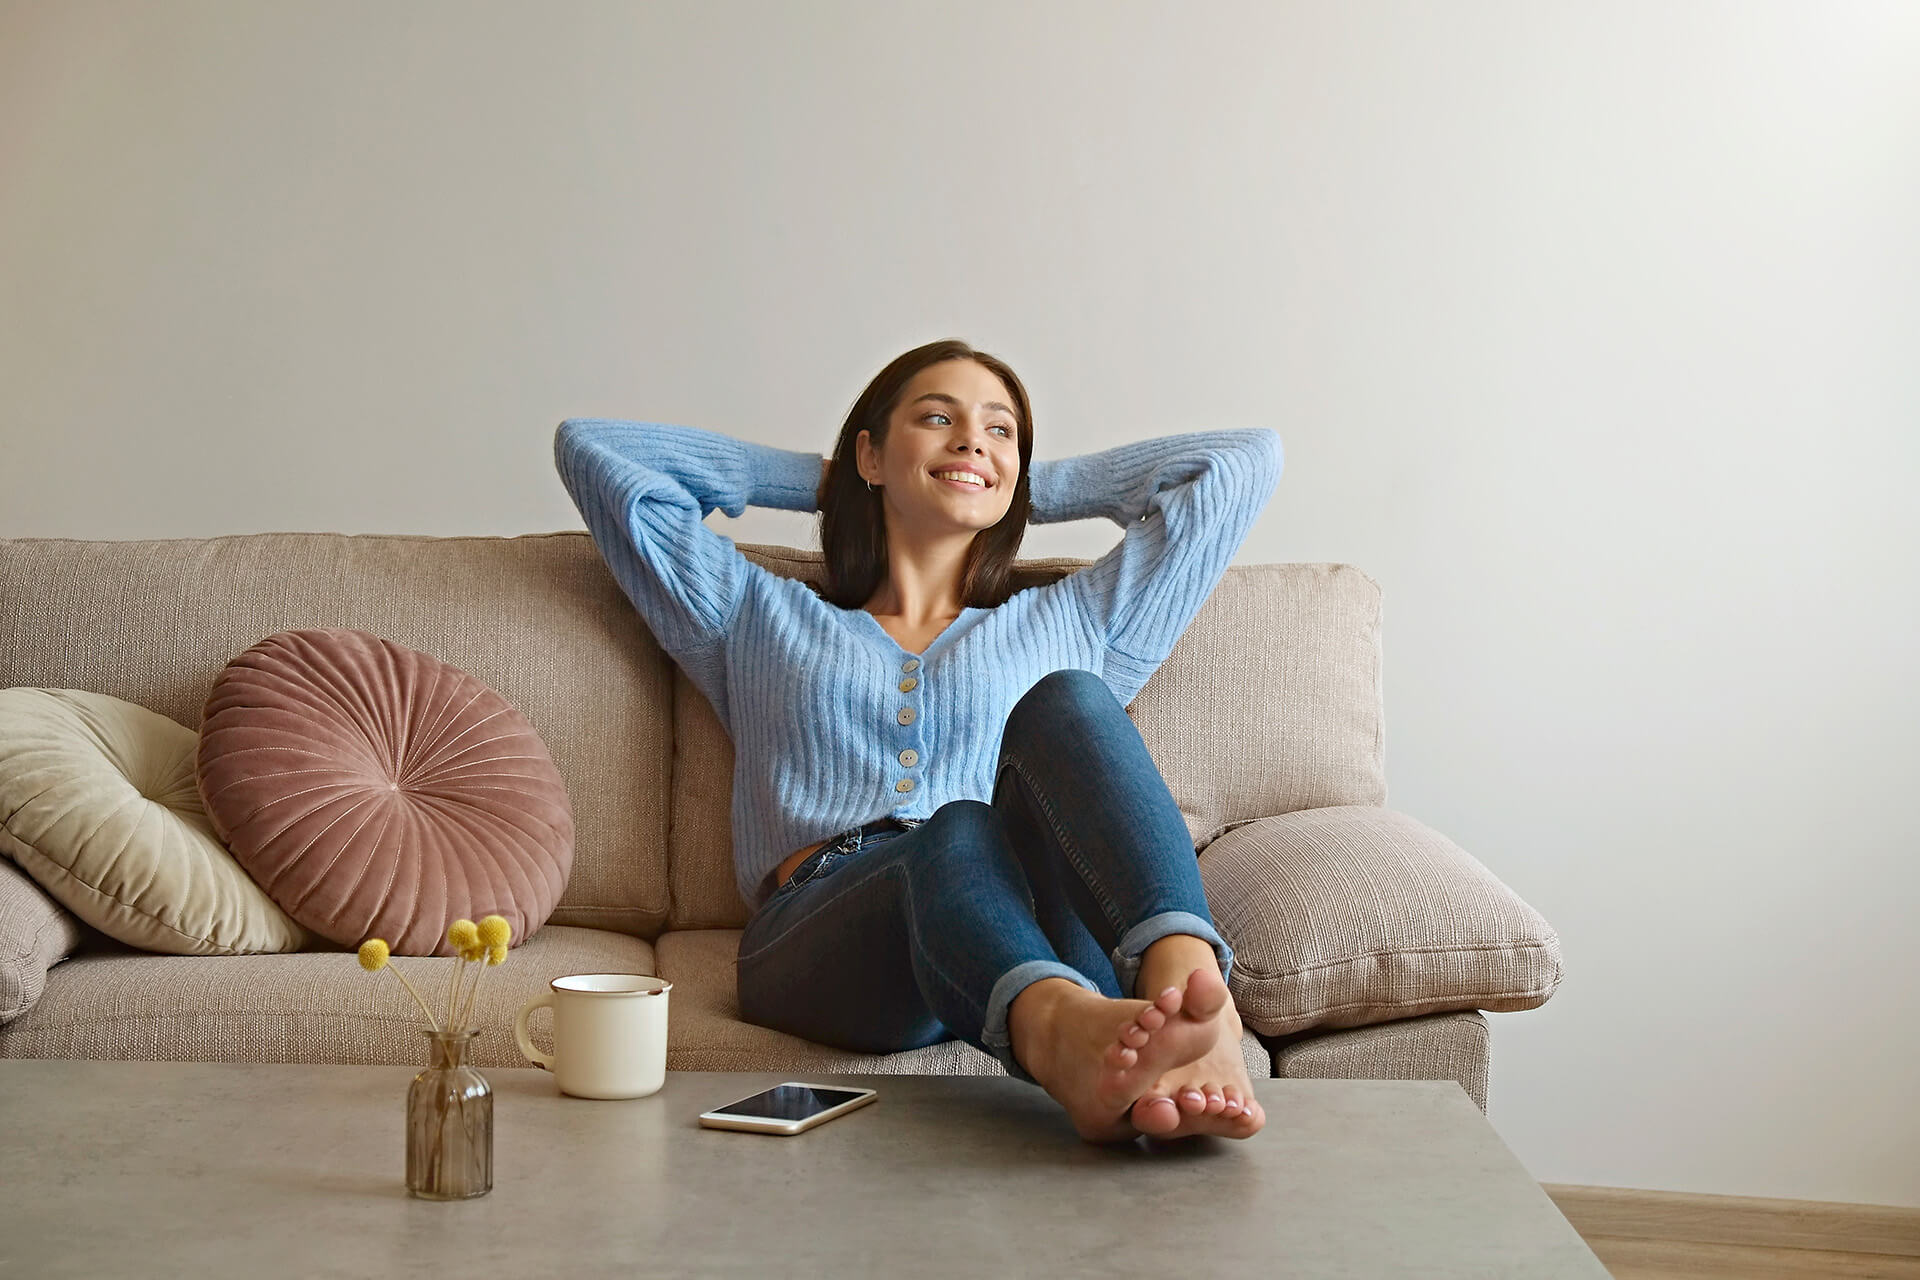 Image showing a woman relaxing on her couch